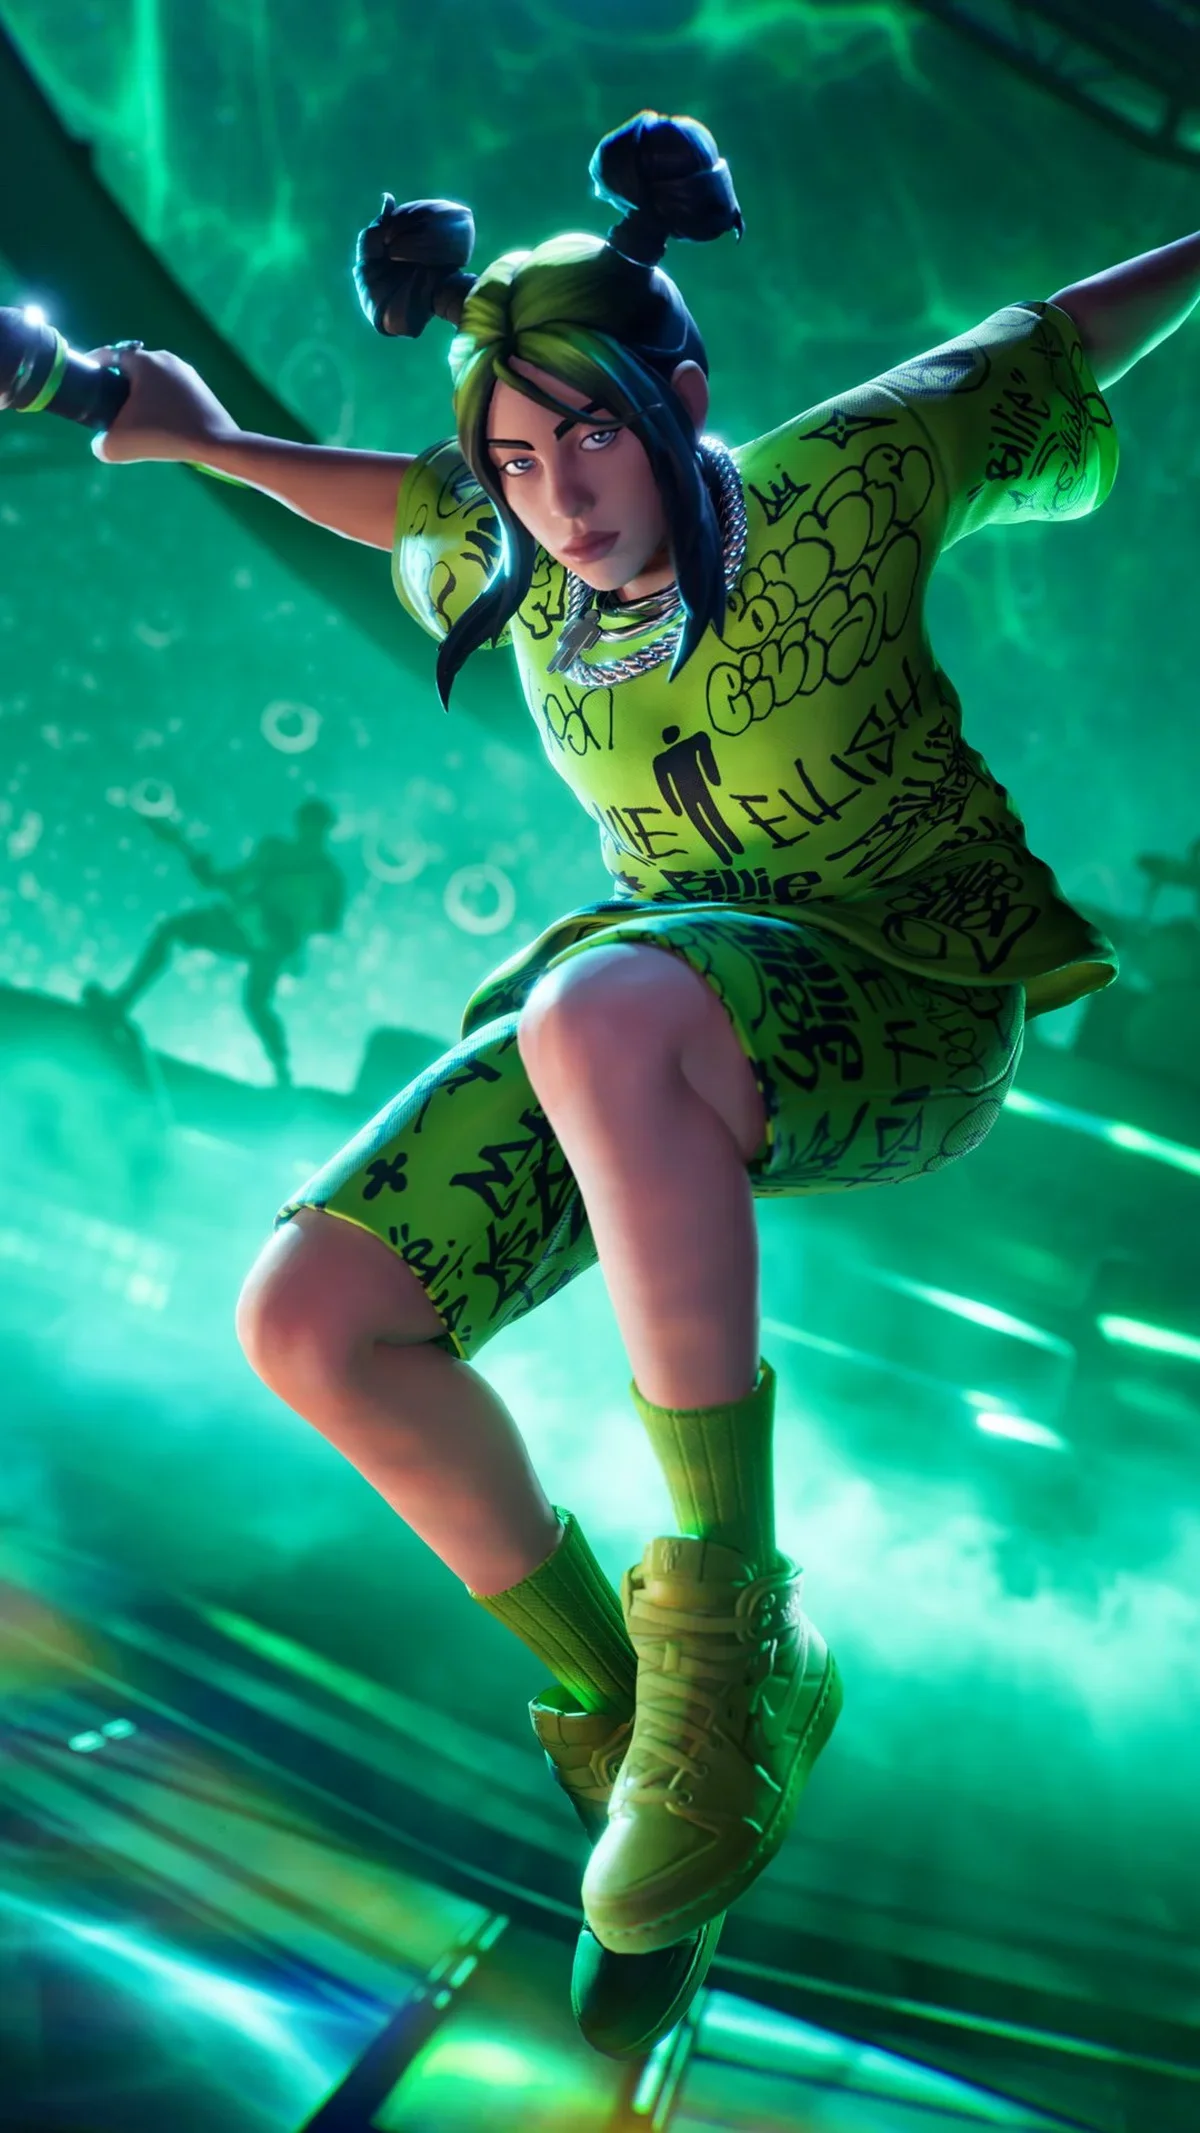 Billie Eilish is coming to Fortnite